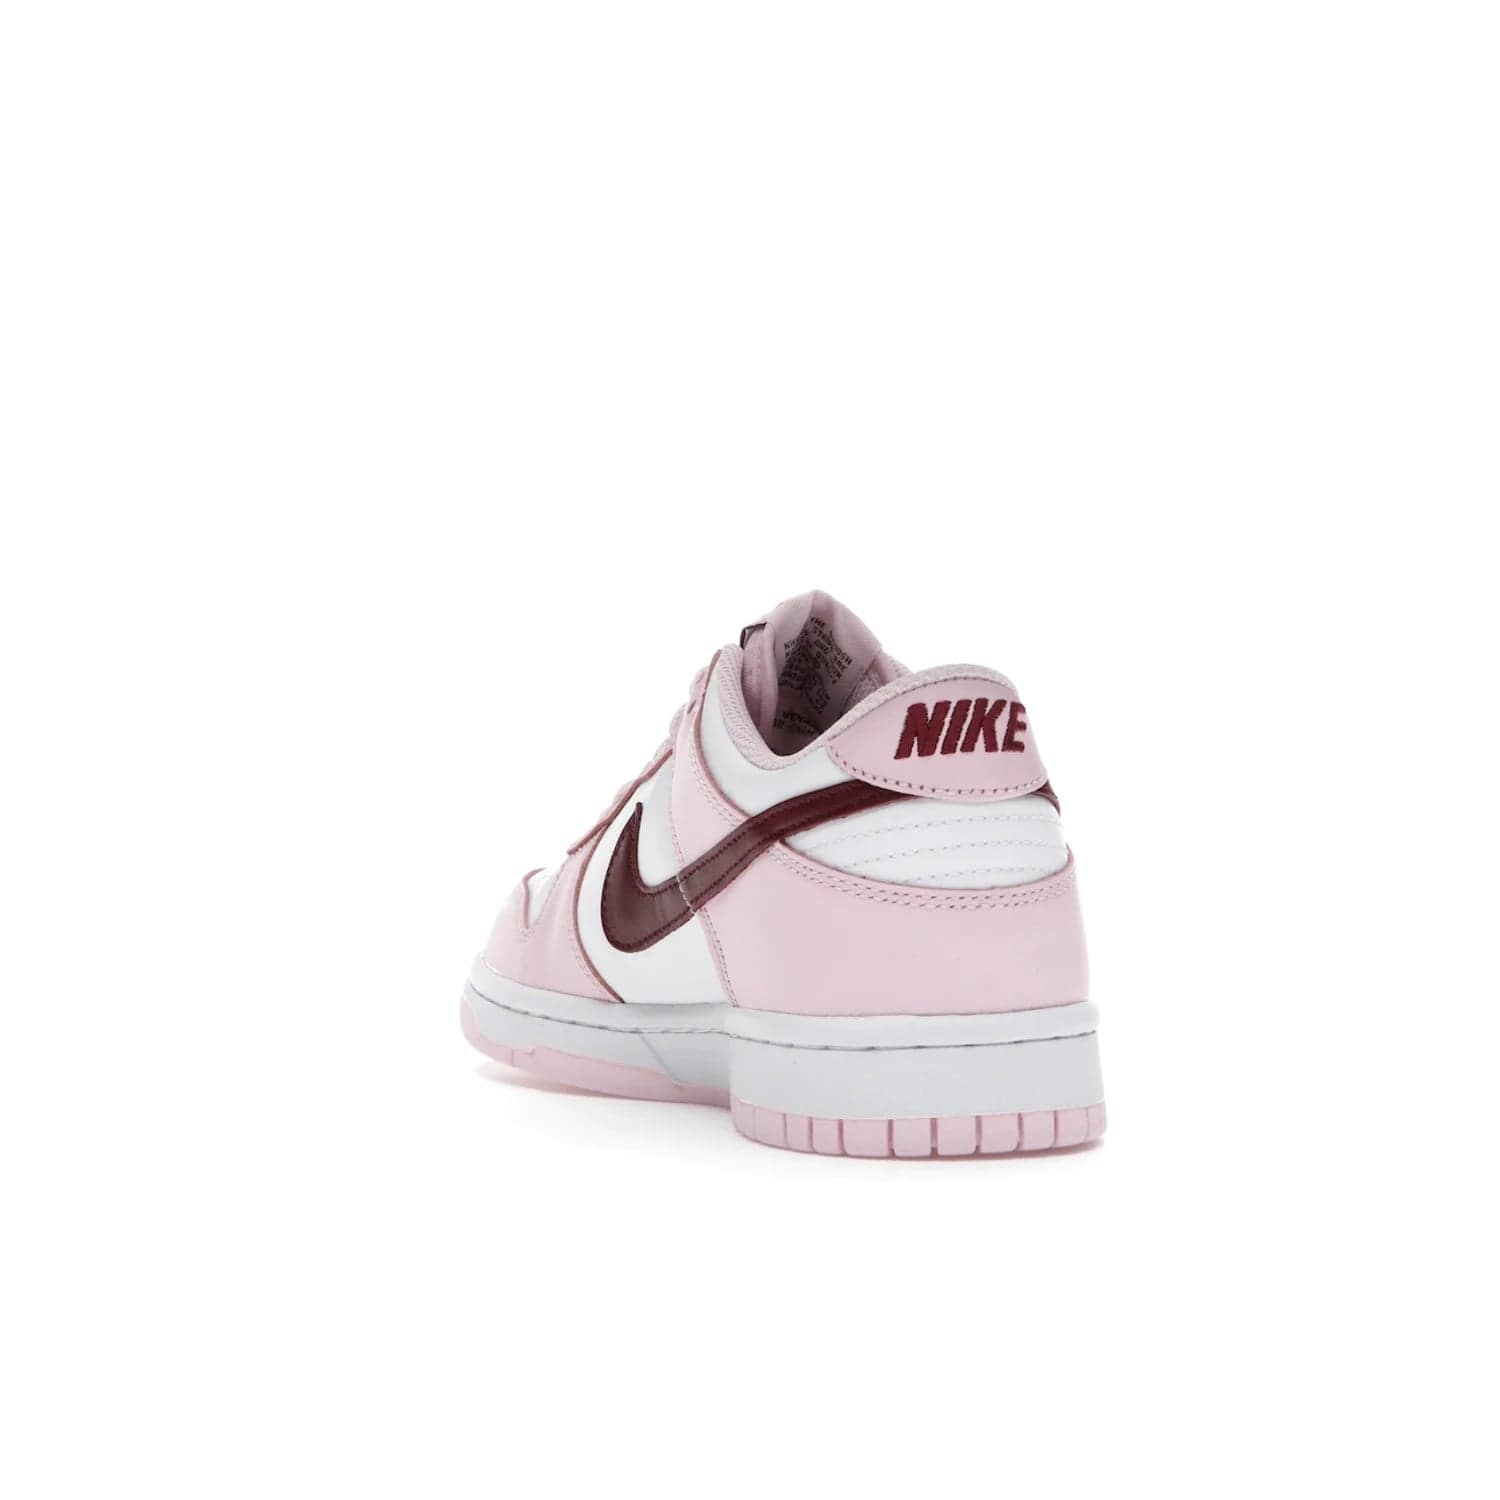 Nike Dunk Low Pink Foam Red White (GS) - Image 26 - Only at www.BallersClubKickz.com - #
Introducing the daring and stylish Nike Dunk Low Pink Foam Red White (GS) sneaker for grade schoolers. White leather with pink overlays and Dark Beetroot accents, classic Nike Dunk midsole and pink outsole. Released August 2021 for $85.